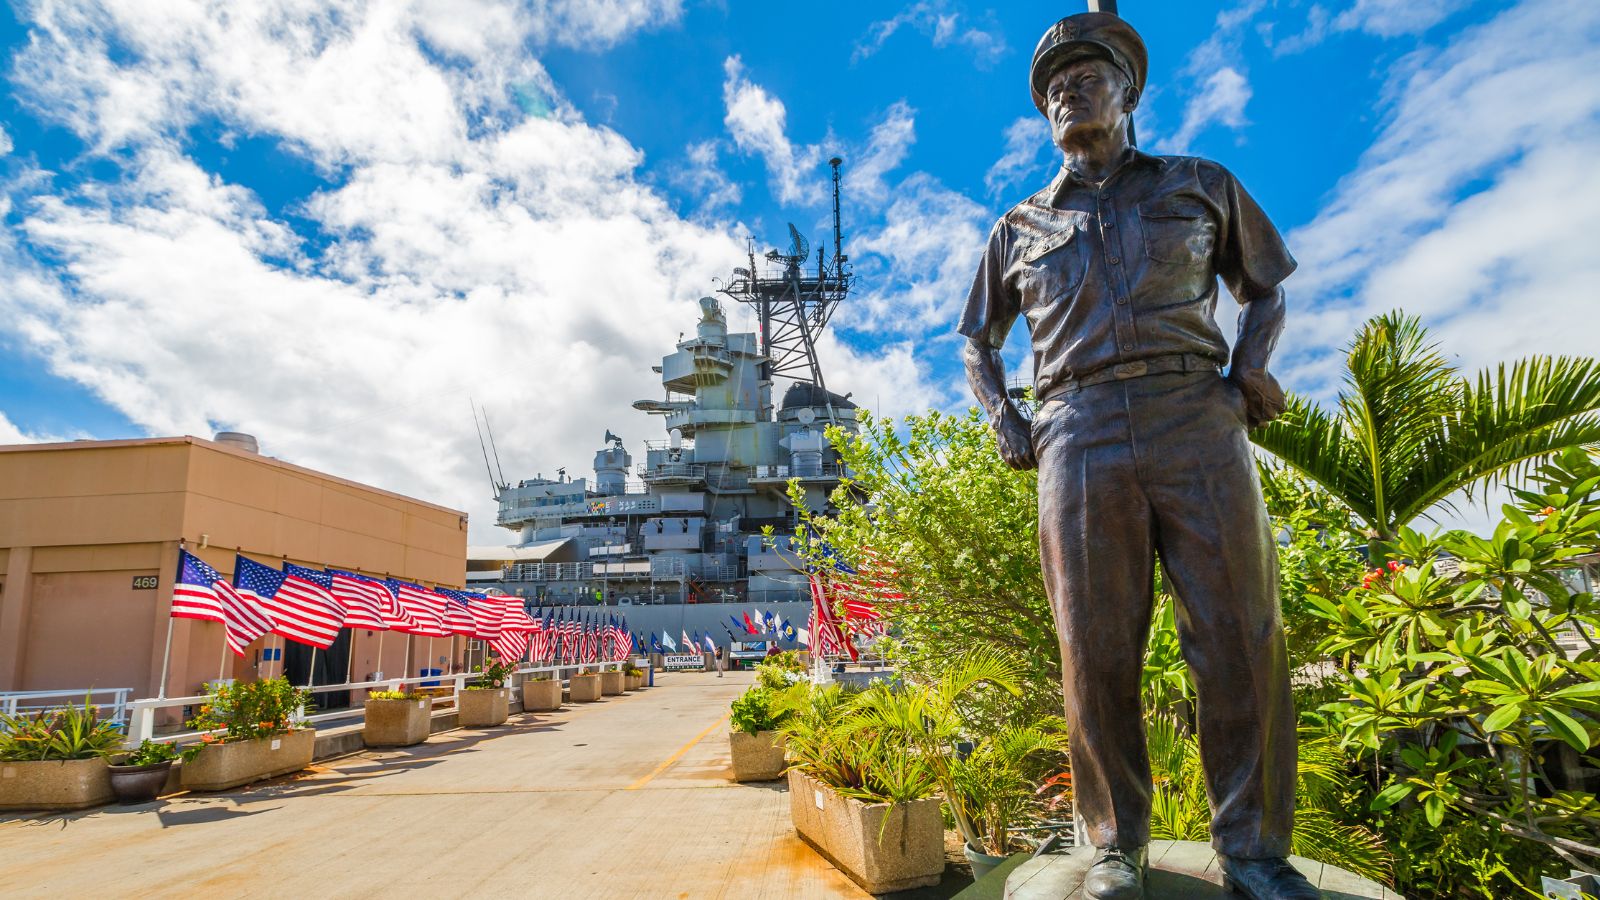 <p>Recommended by 70% of visitors</p><p>The Pearl Harbor National Memorial, Oahu, Hawaii, commemorates the 1941 attack that led the US into World War II. The 21.3-acre site includes the USS Arizona, Utah, and Oklahoma Memorials and a visitor center with World War II exhibits. Nearby are the USS Missouri Memorial, the USS Bowfin Museum, and the Pearl Harbor Aviation Museum—a must-visit for history enthusiasts.</p>